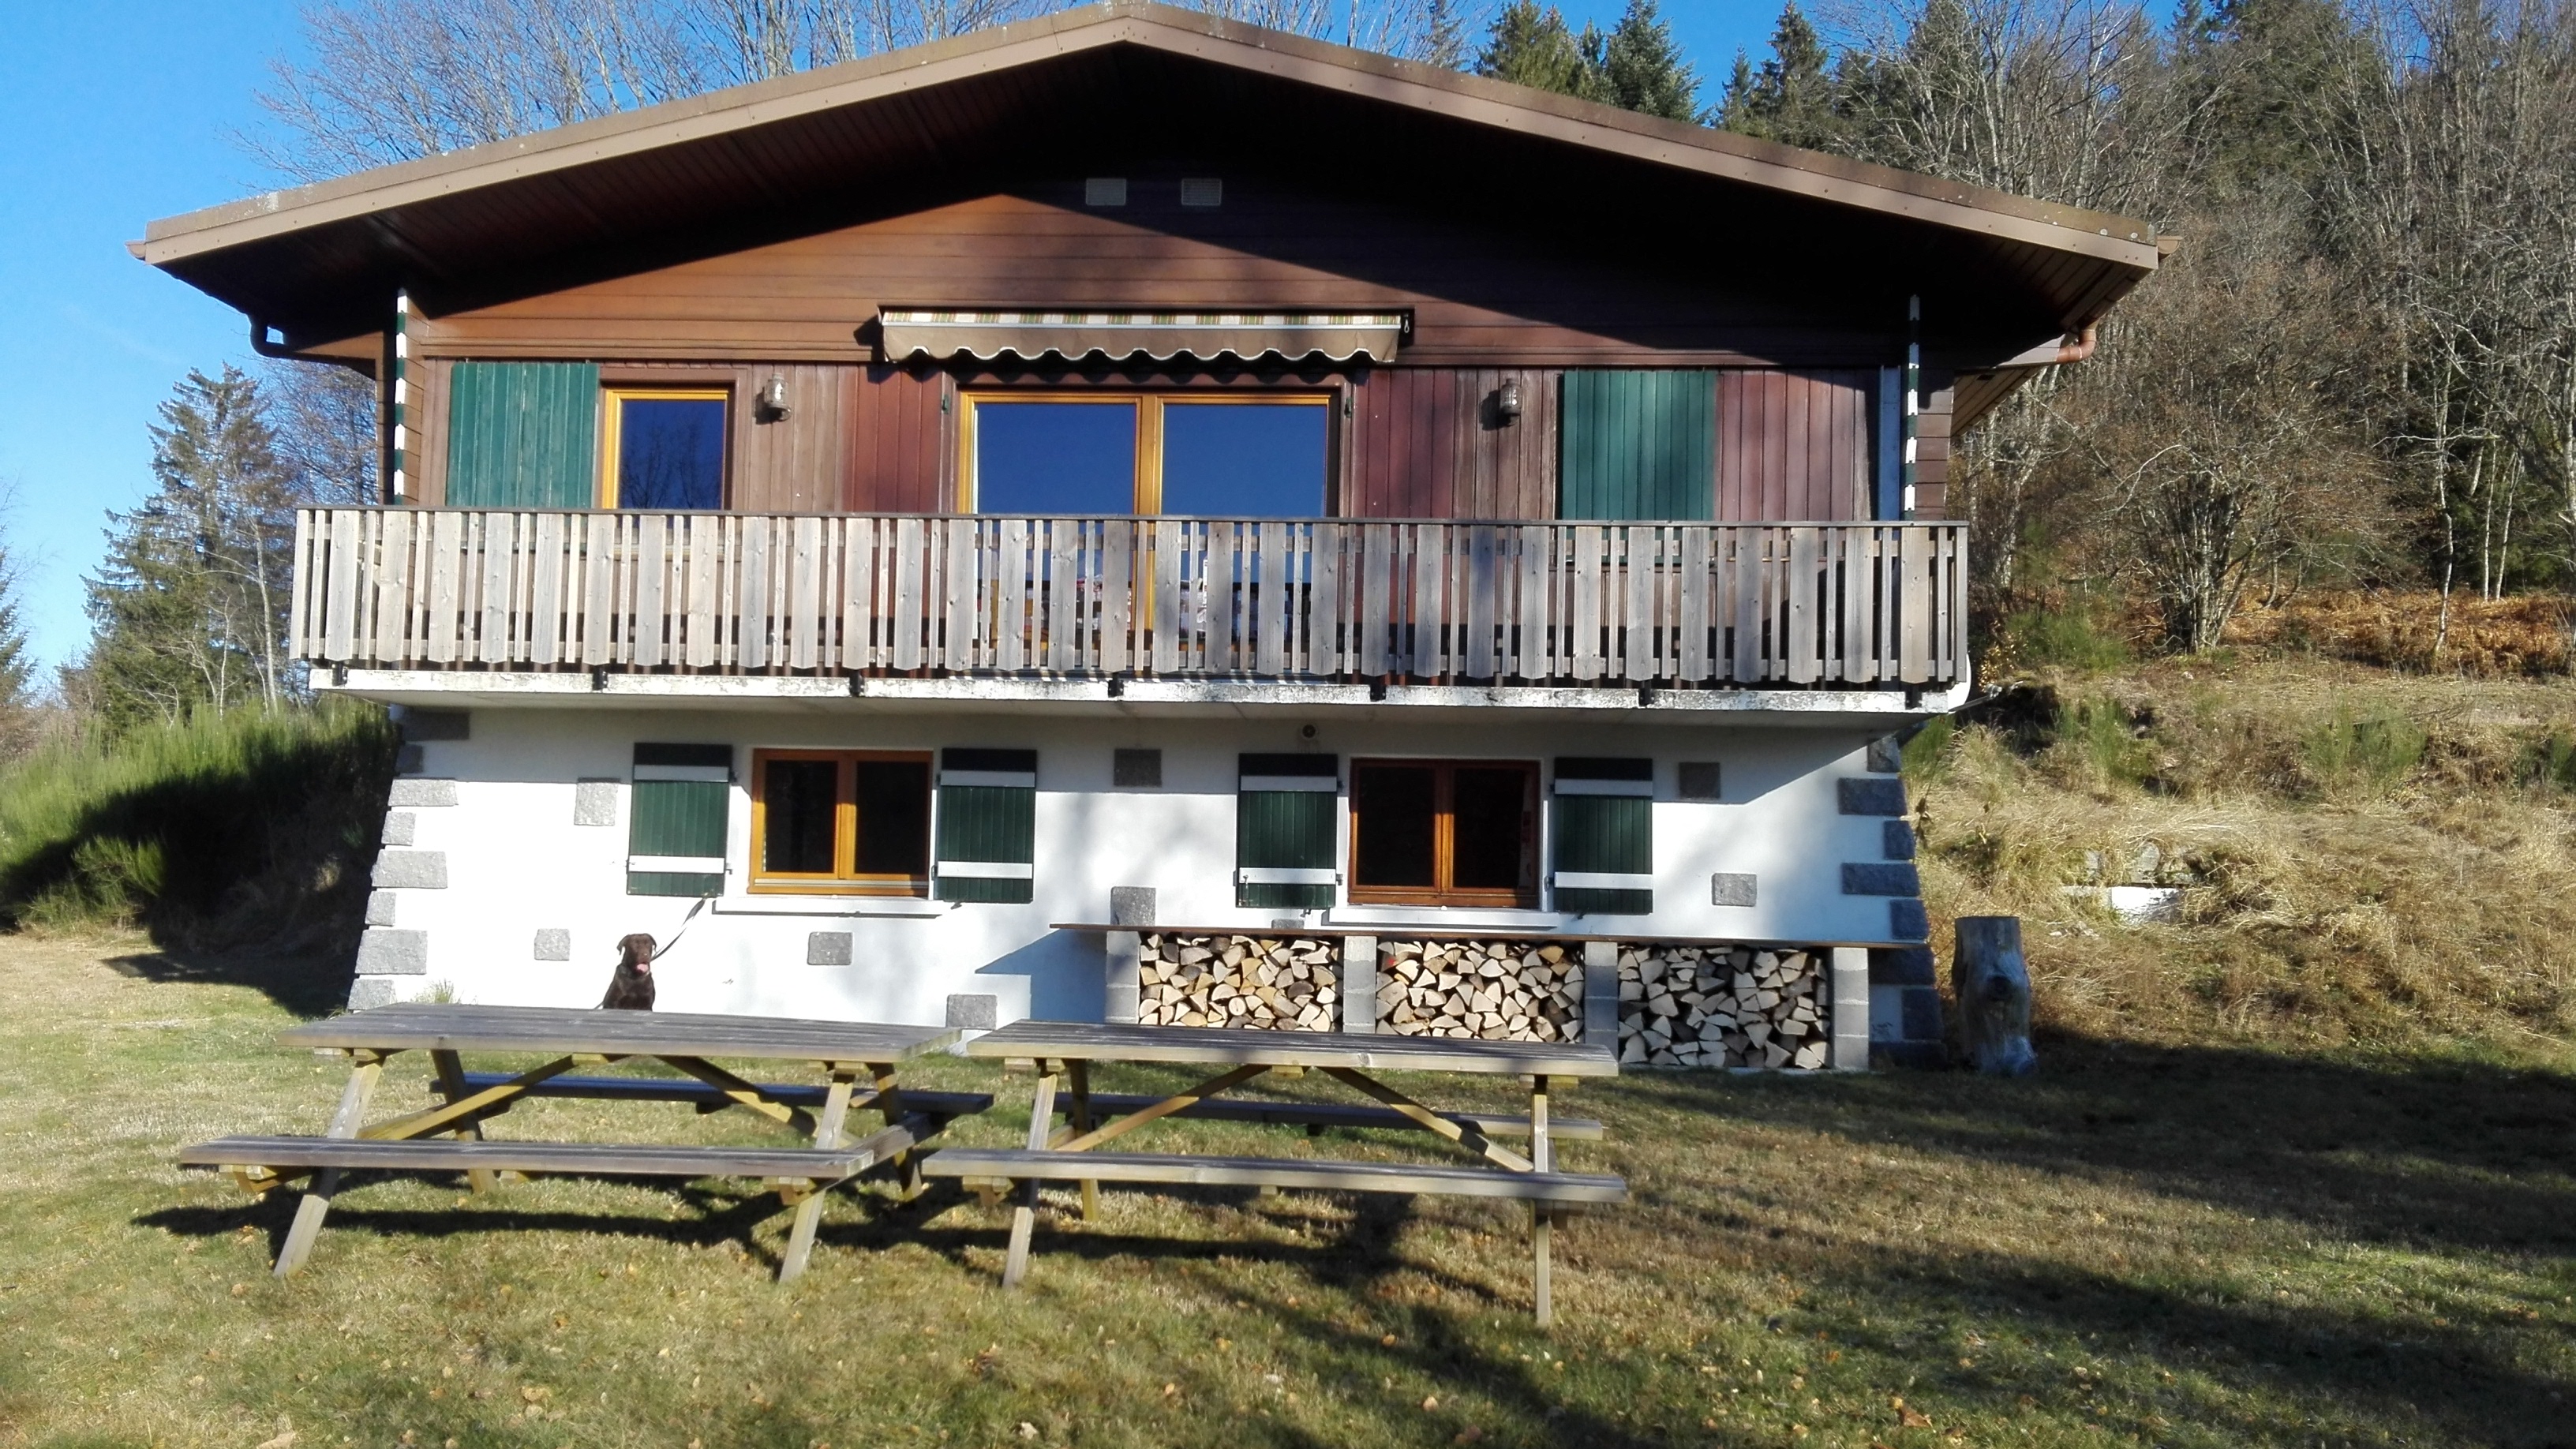 The frond of the chalet, where is located the wood storage and the garden tables